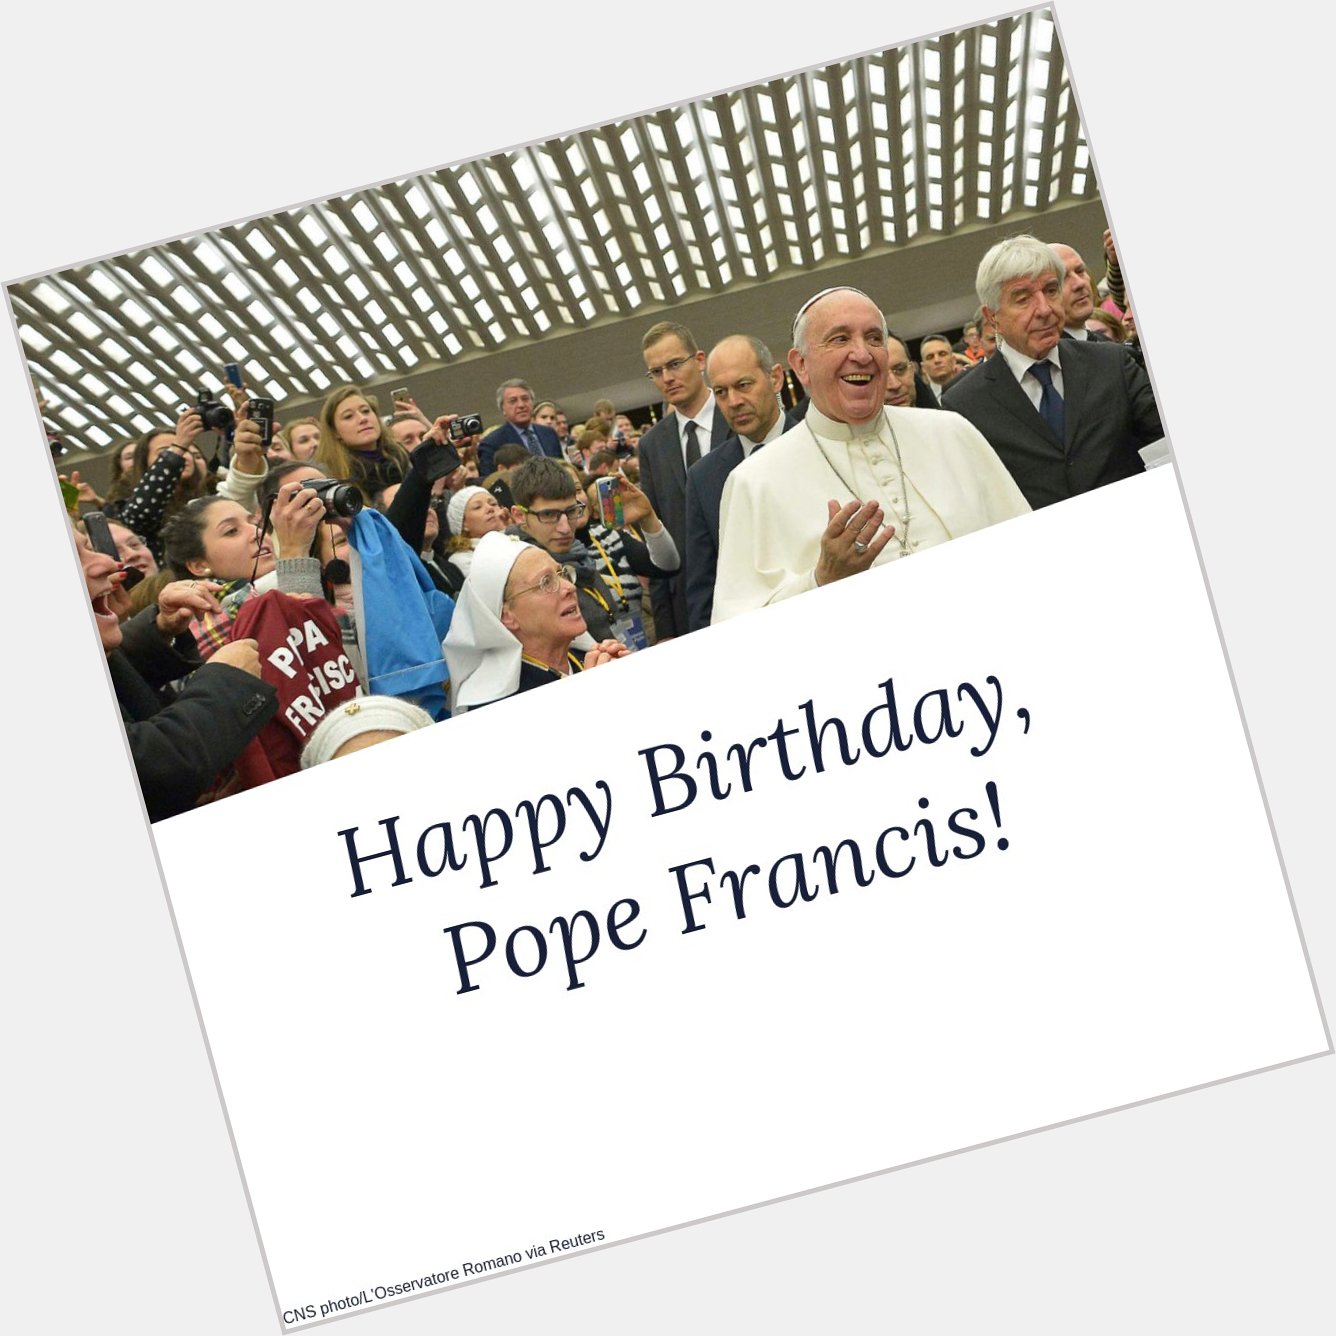 Join us in wishing Pope Francis a Happy Birthday! 